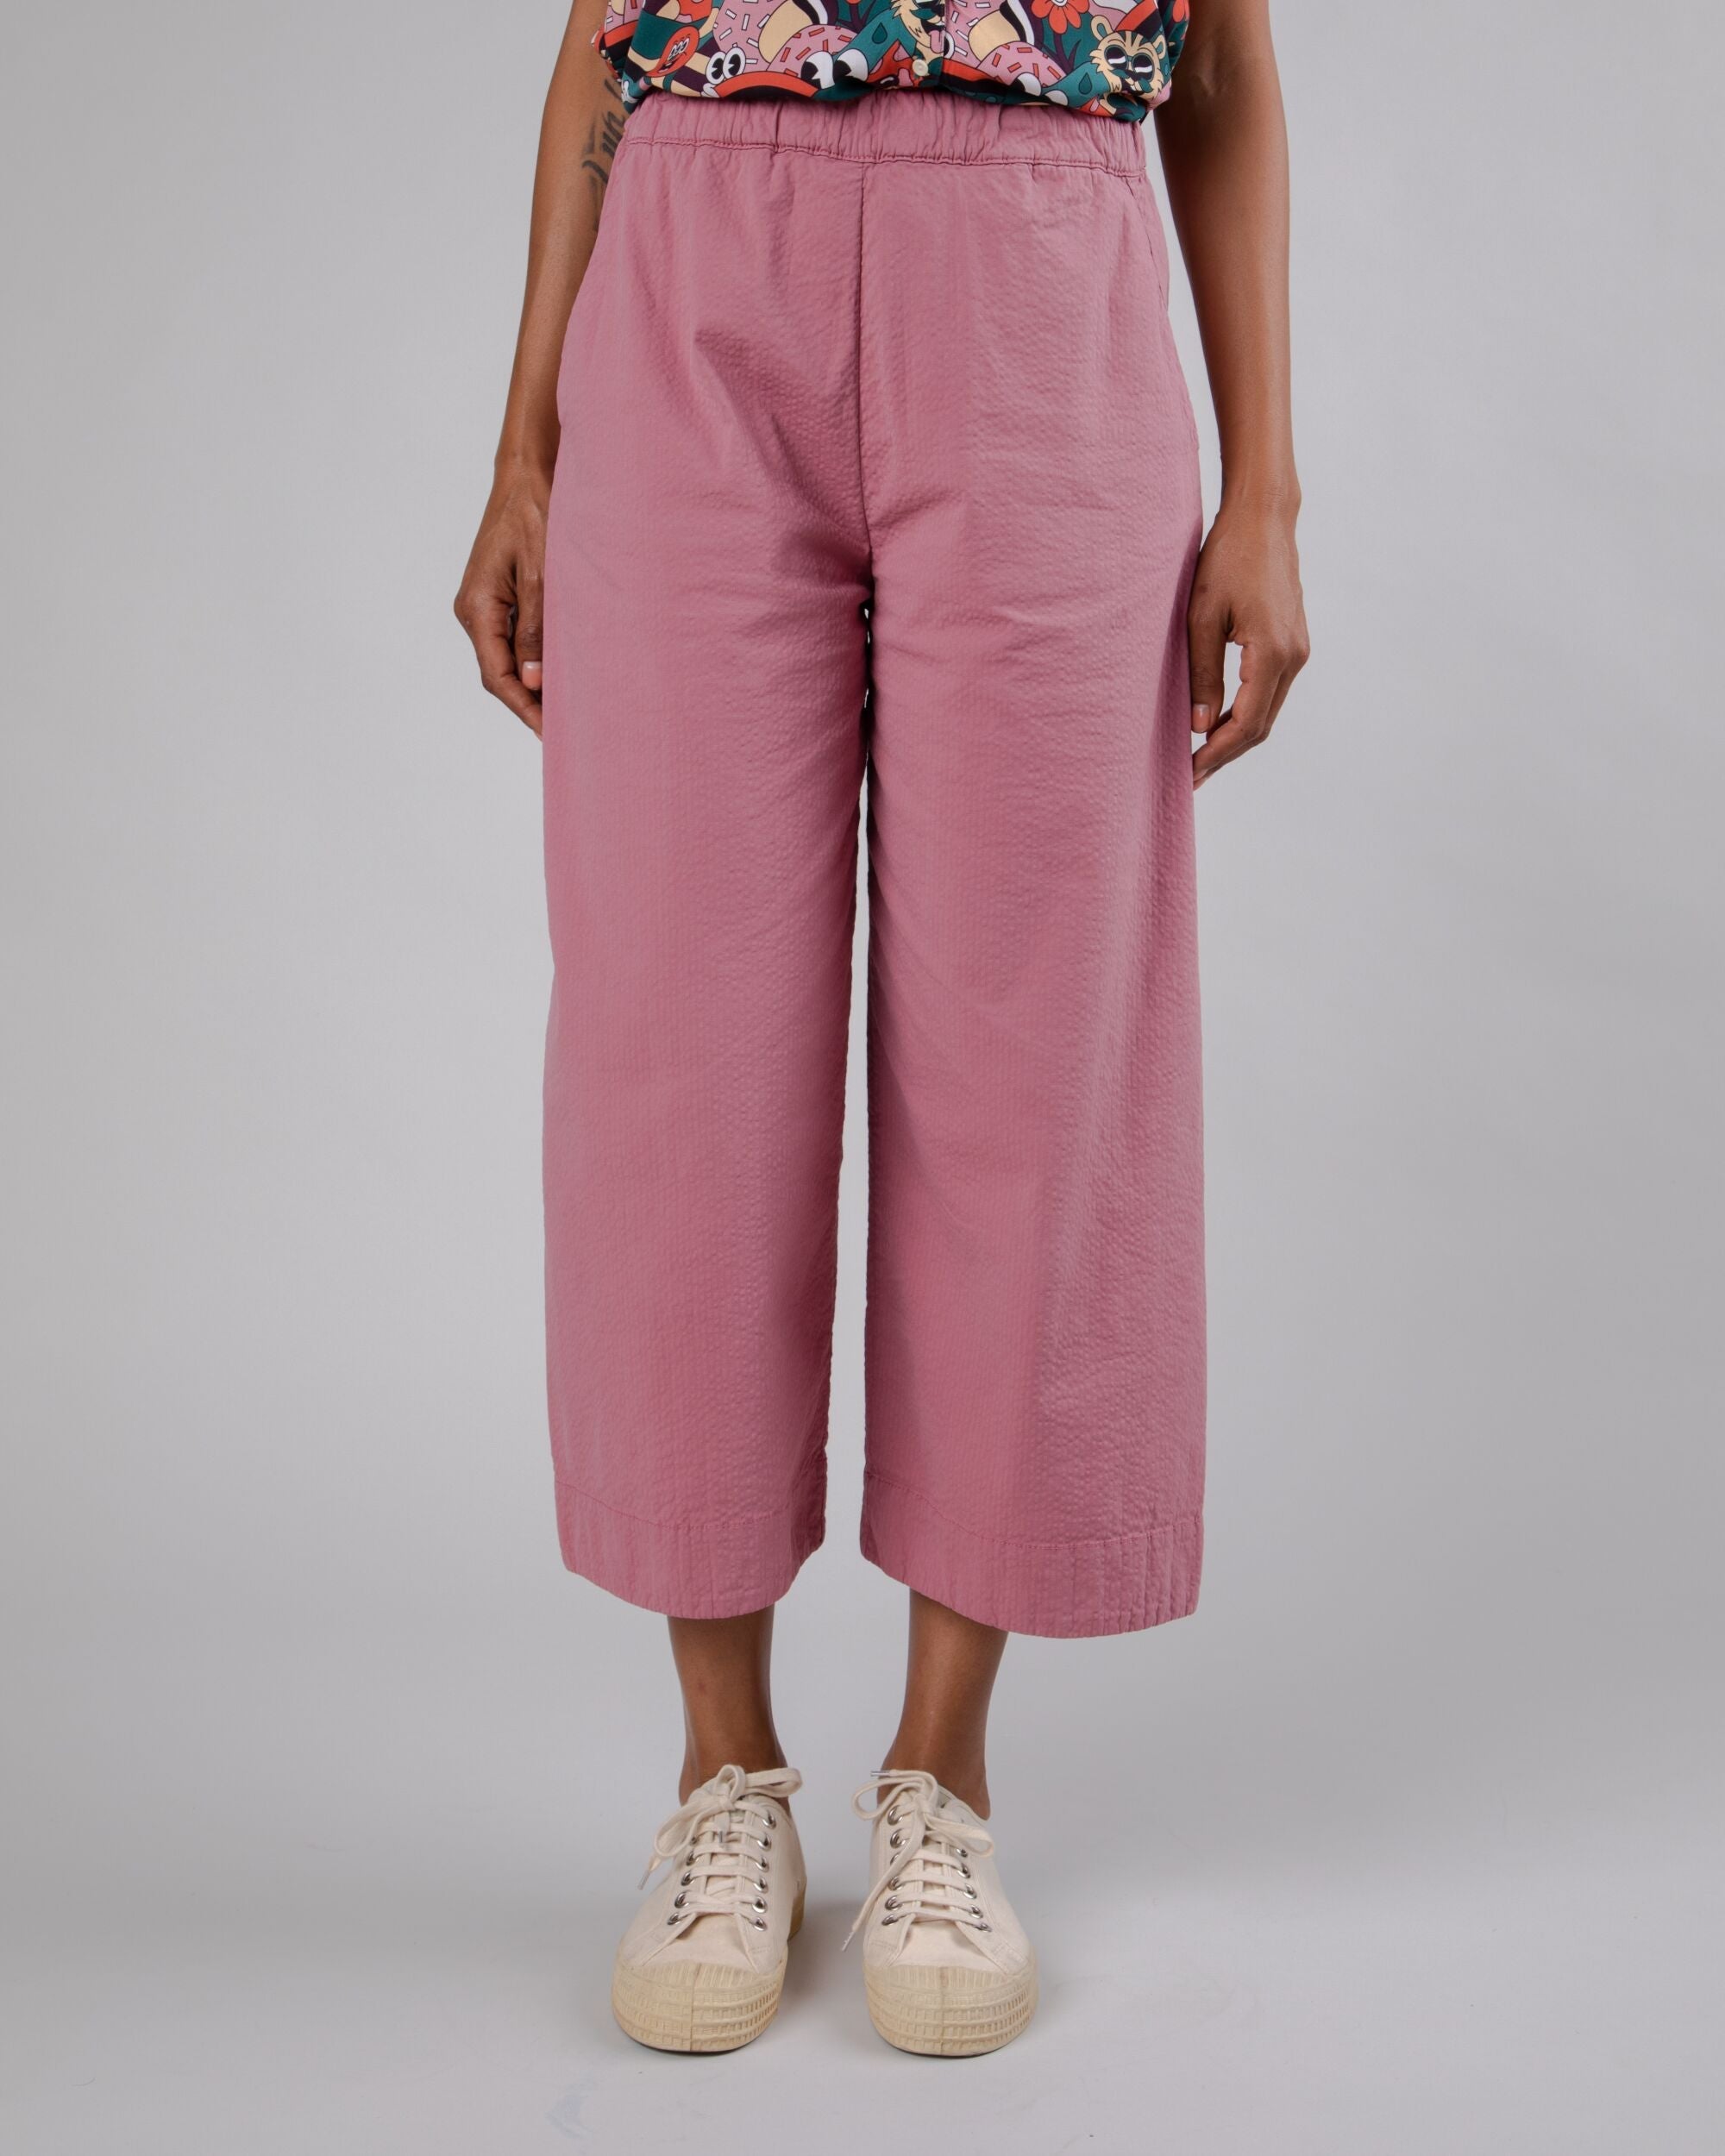 Oversize trousers Picnic in pink made of organic cotton by Brava Fabrics